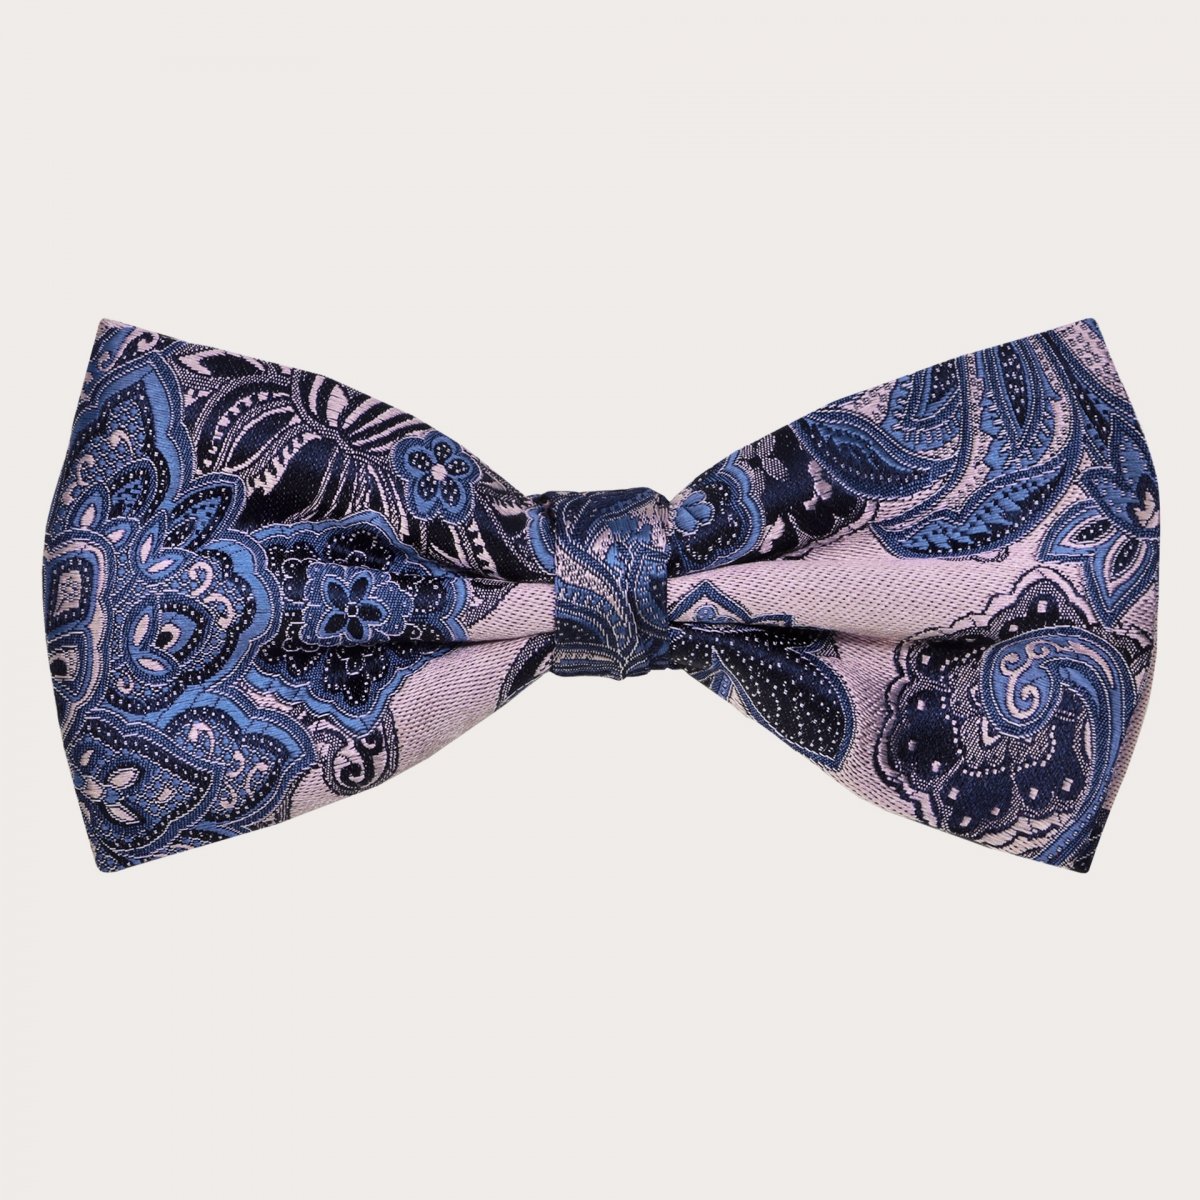 BRUCLE Silk pink and light blue cachemire pre-tied bow tie